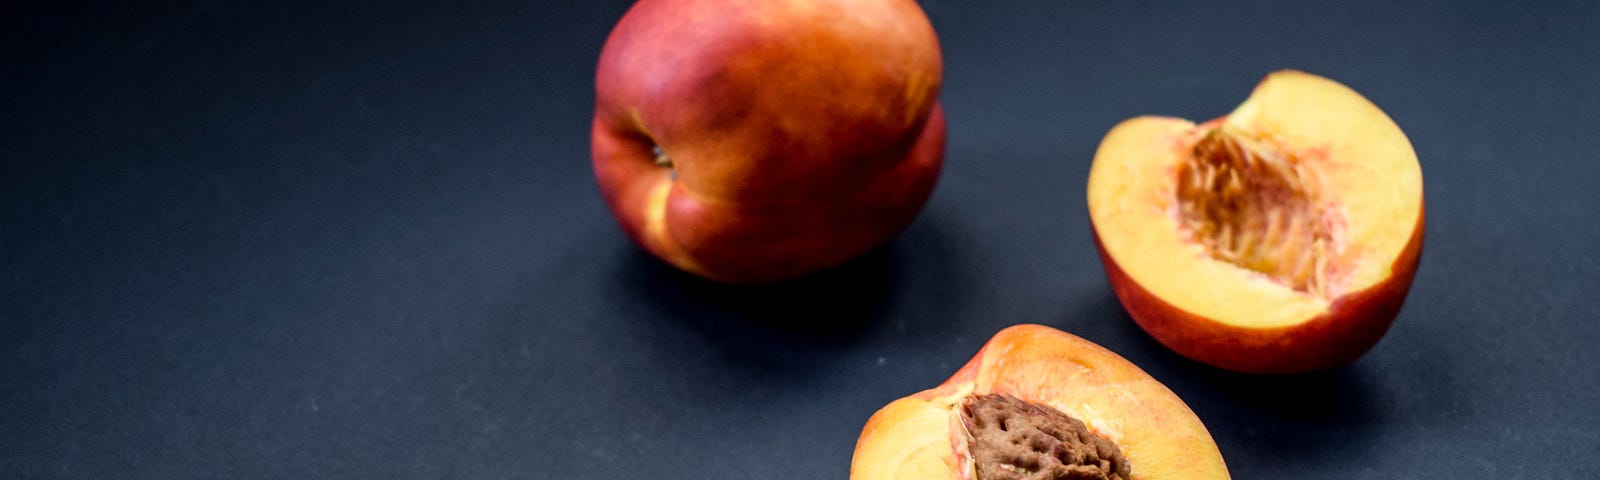 Image of a whole peach and a fresh peach cut in half with pit still visible in other half.